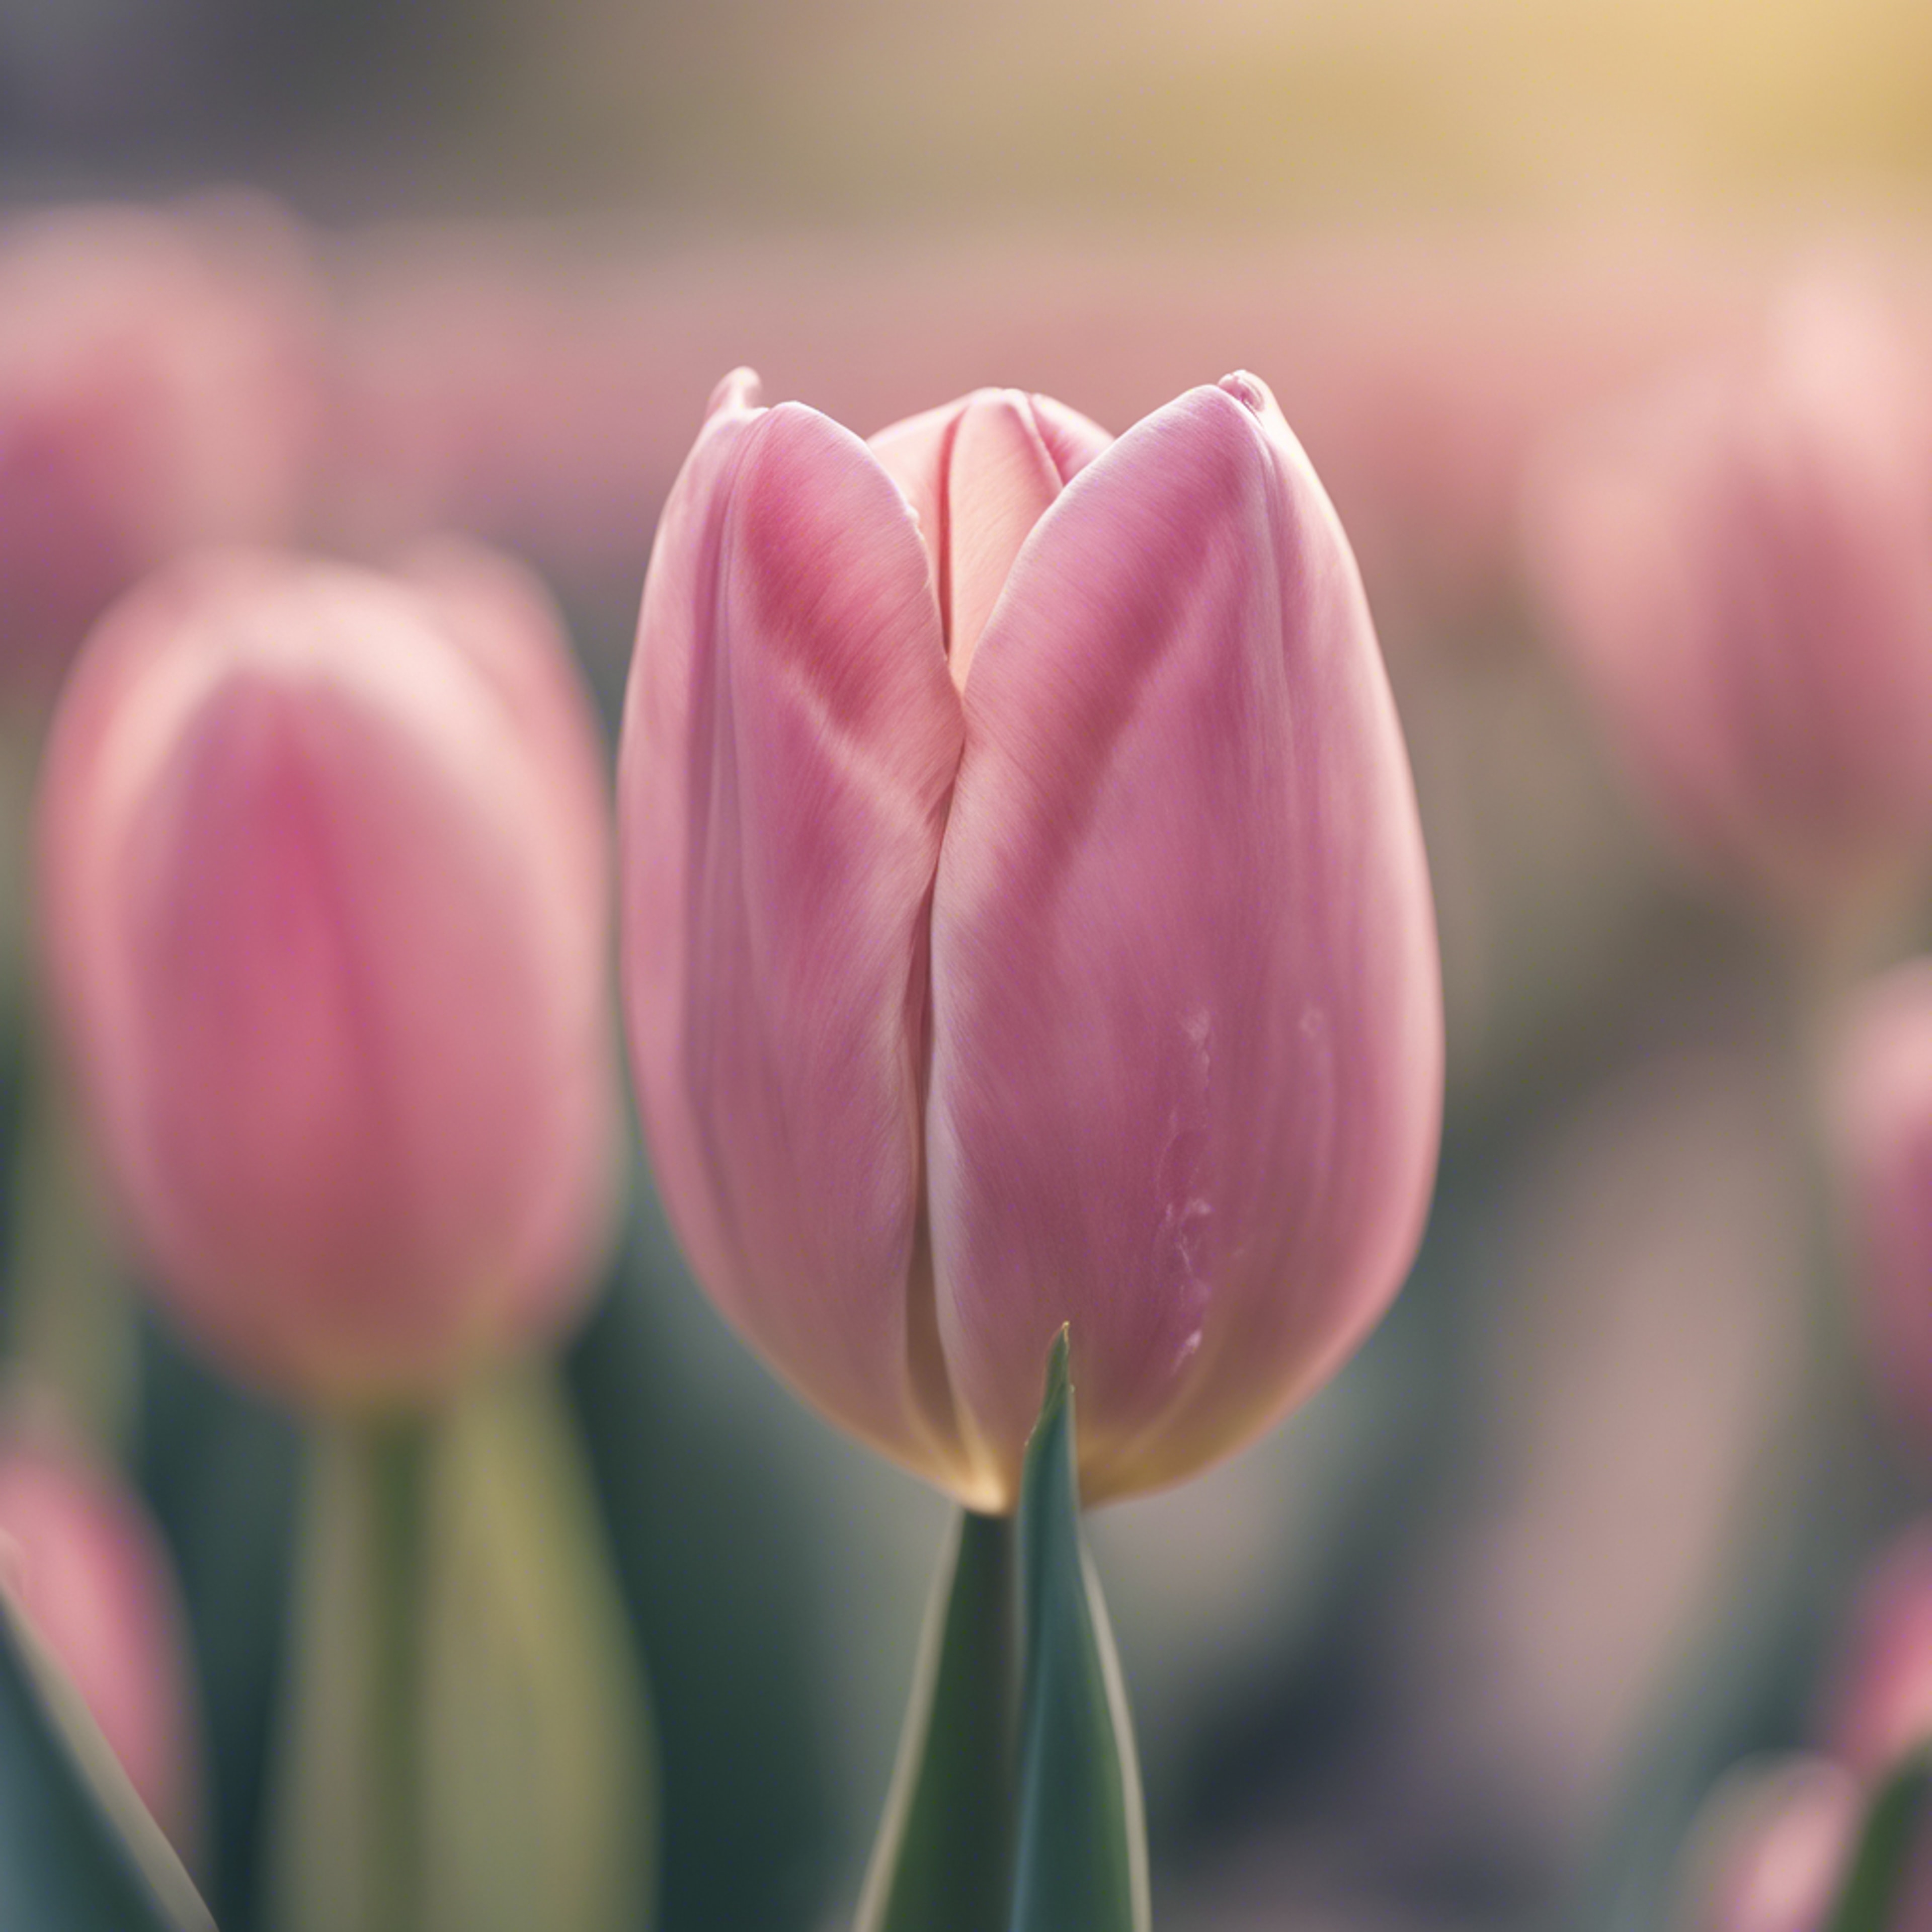 A close-up of a lone pink tulip against a soft and blurry pastel background Ფონი[4132f8cb968043e28bd5]